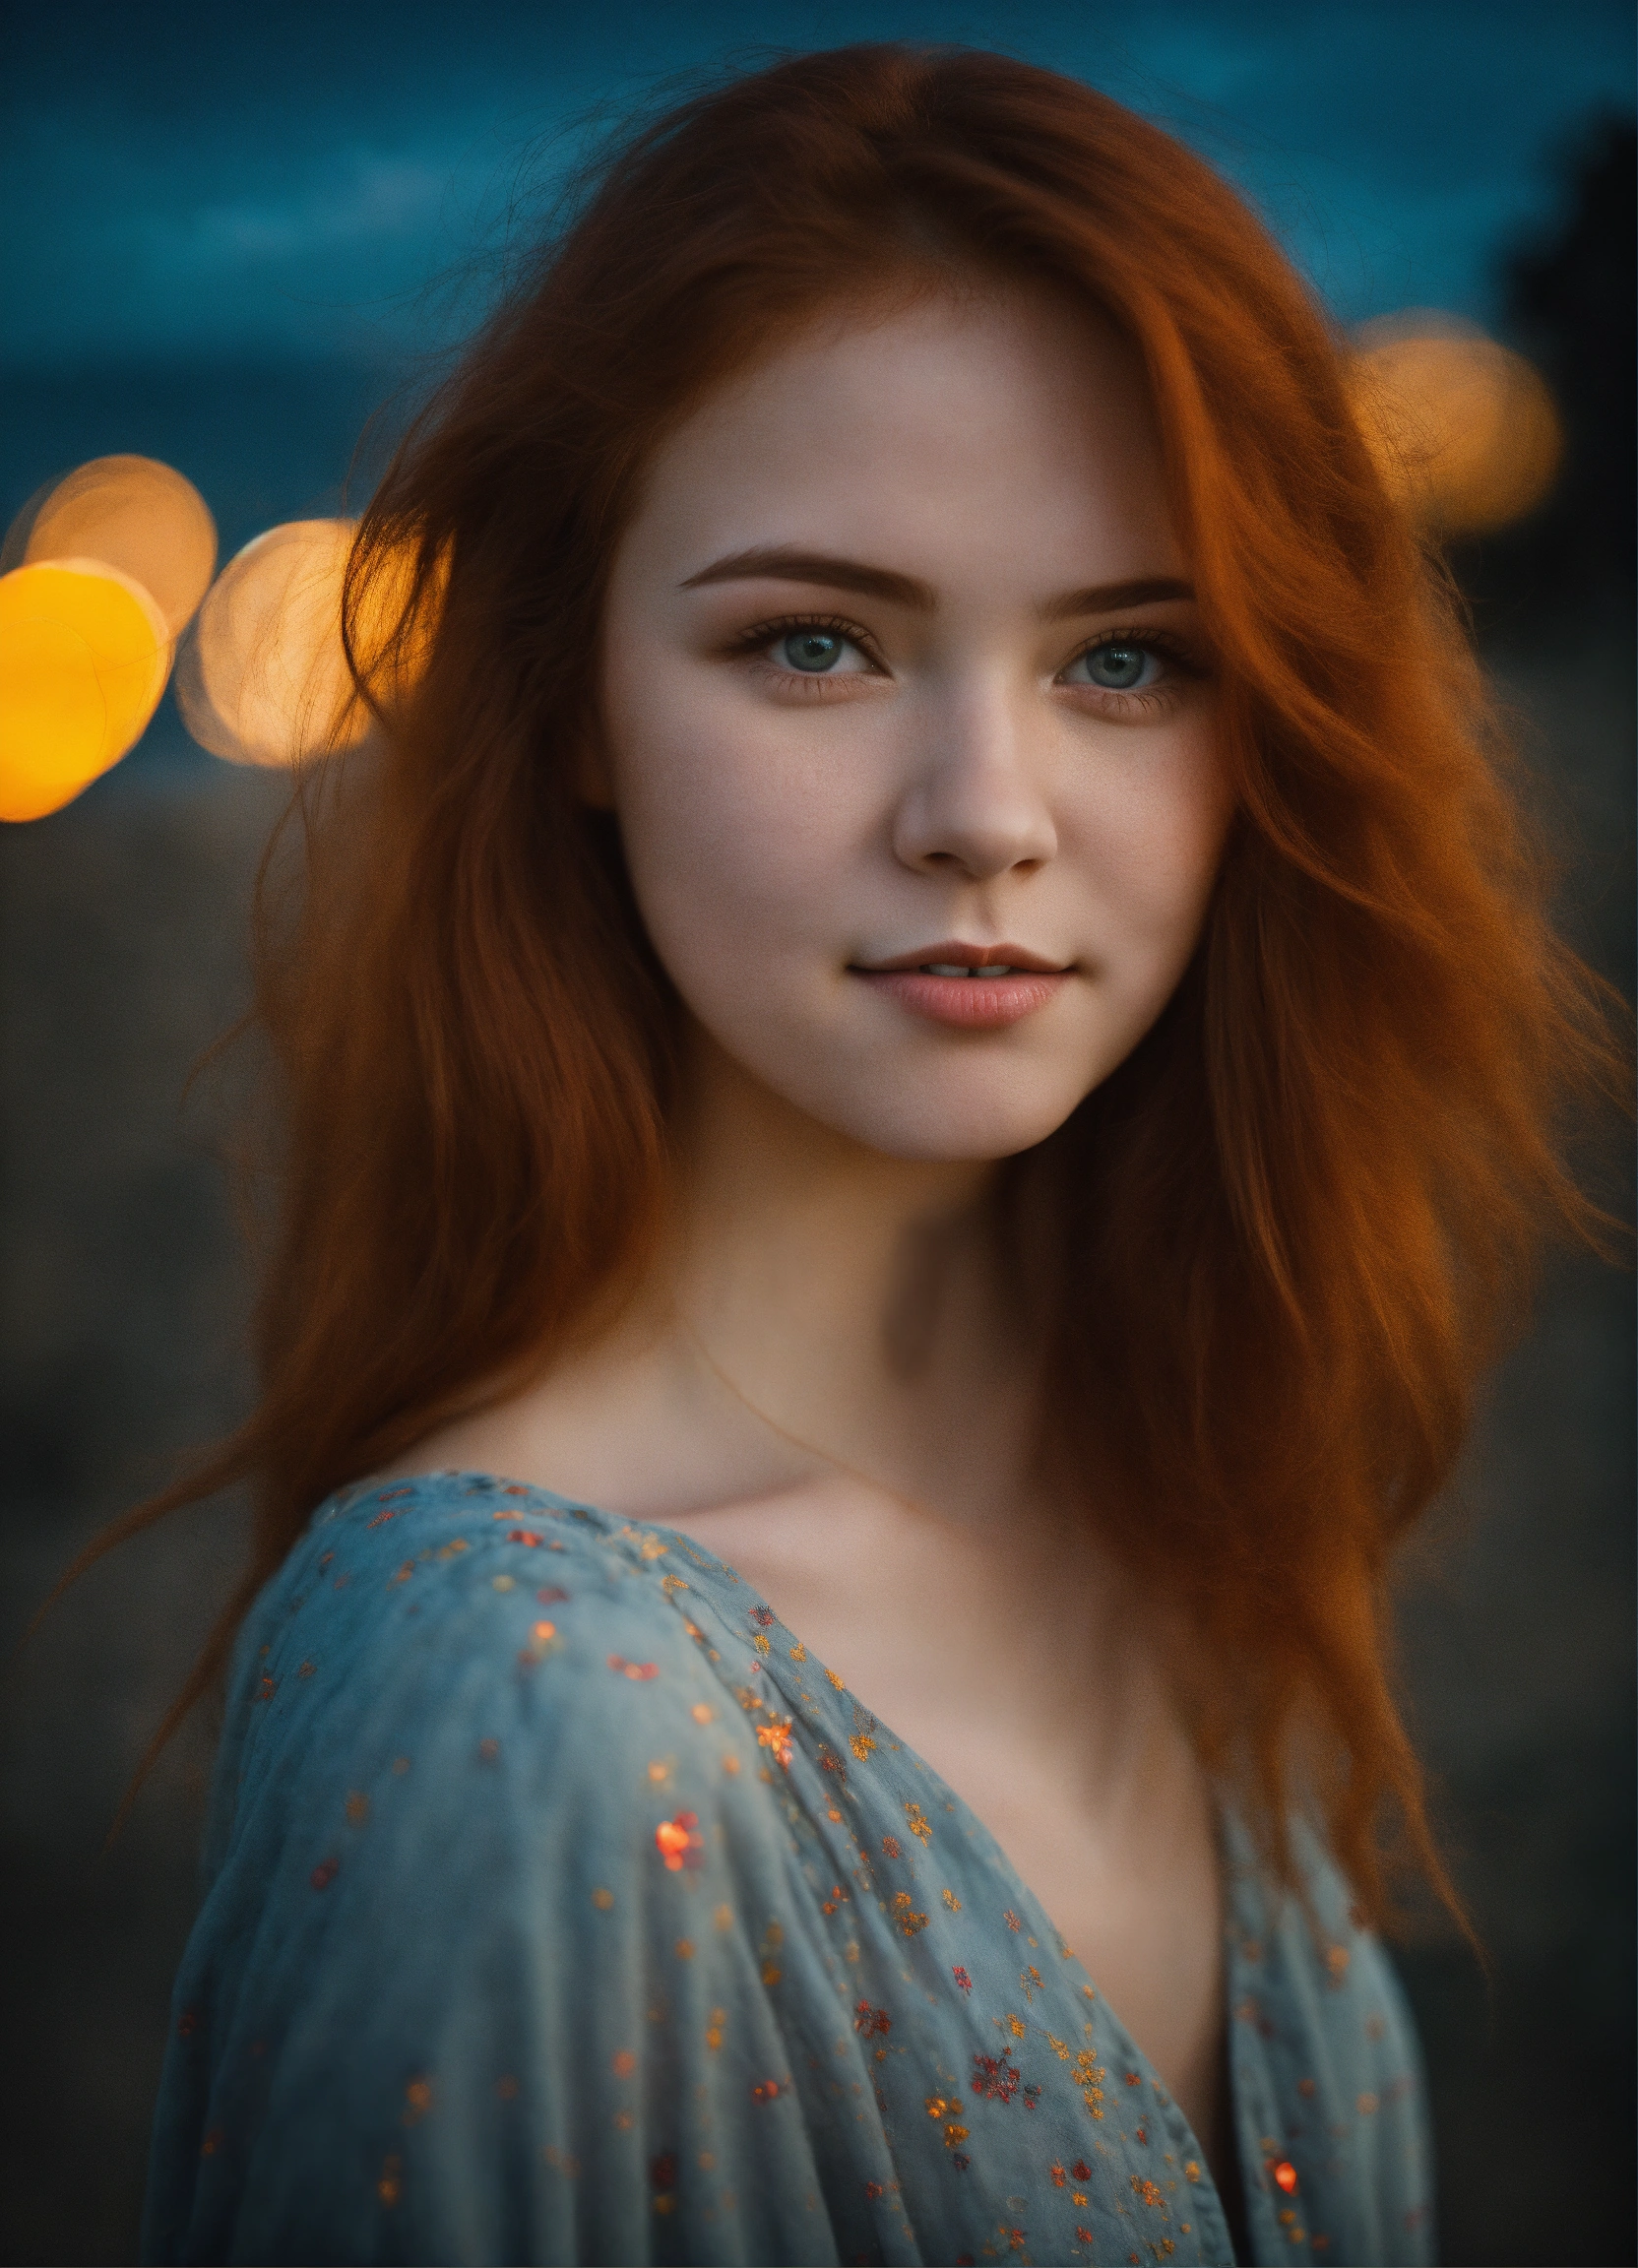 Lexica A Real Photo Of A 21 Year Very Cute Redhead Girl Looking With Much Love In Her Eyes